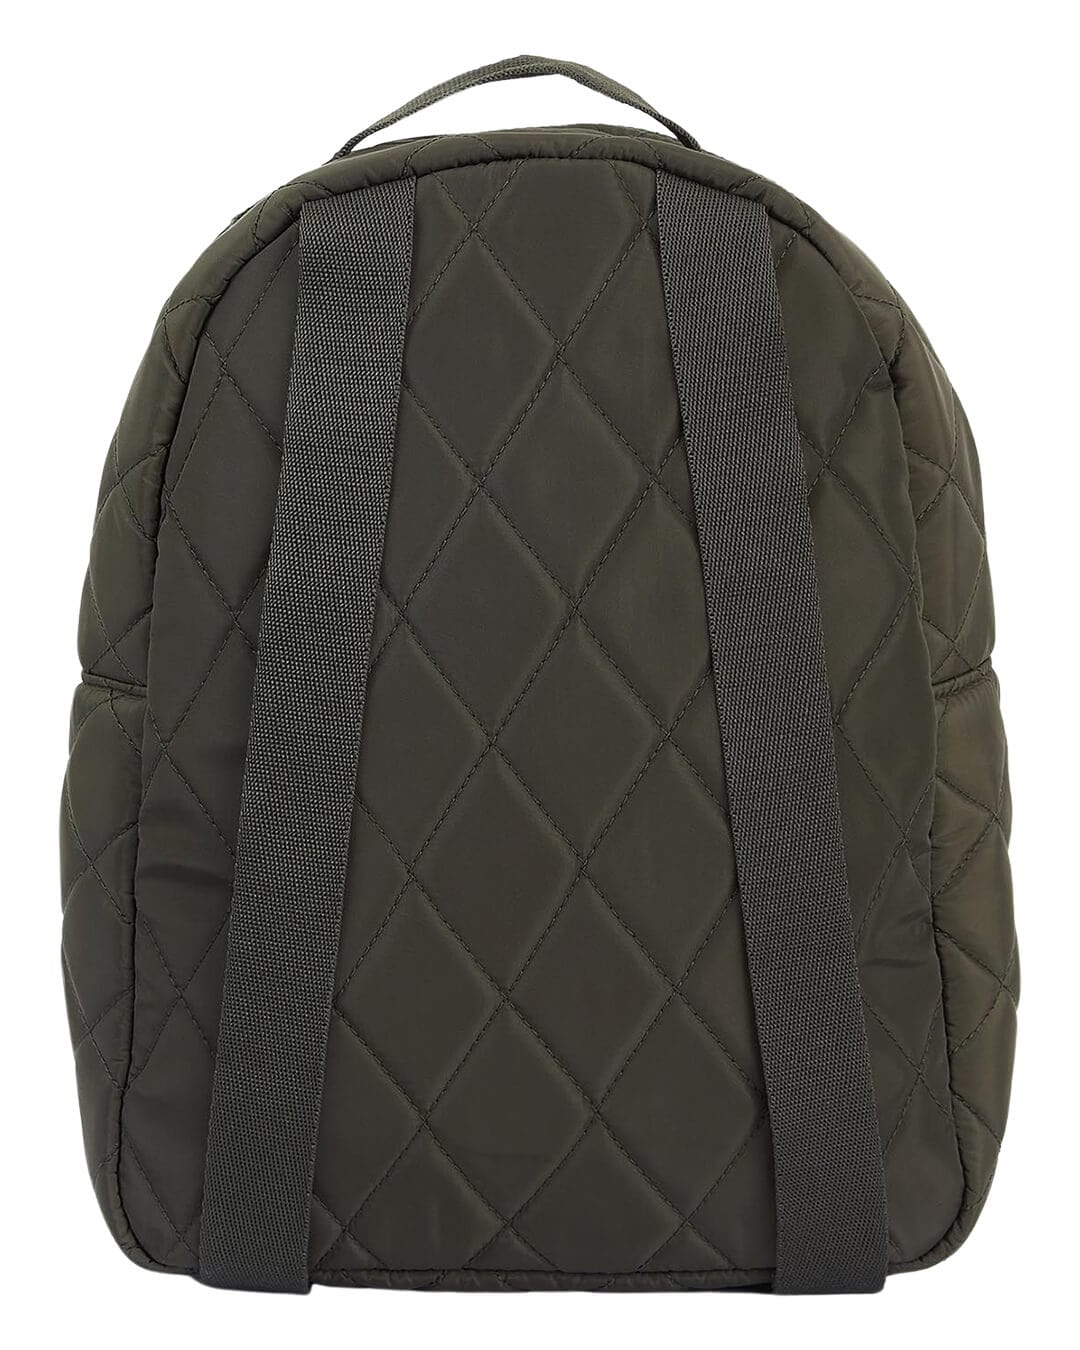 Barbour Bags ONE Barbour Quilted Green Backpack